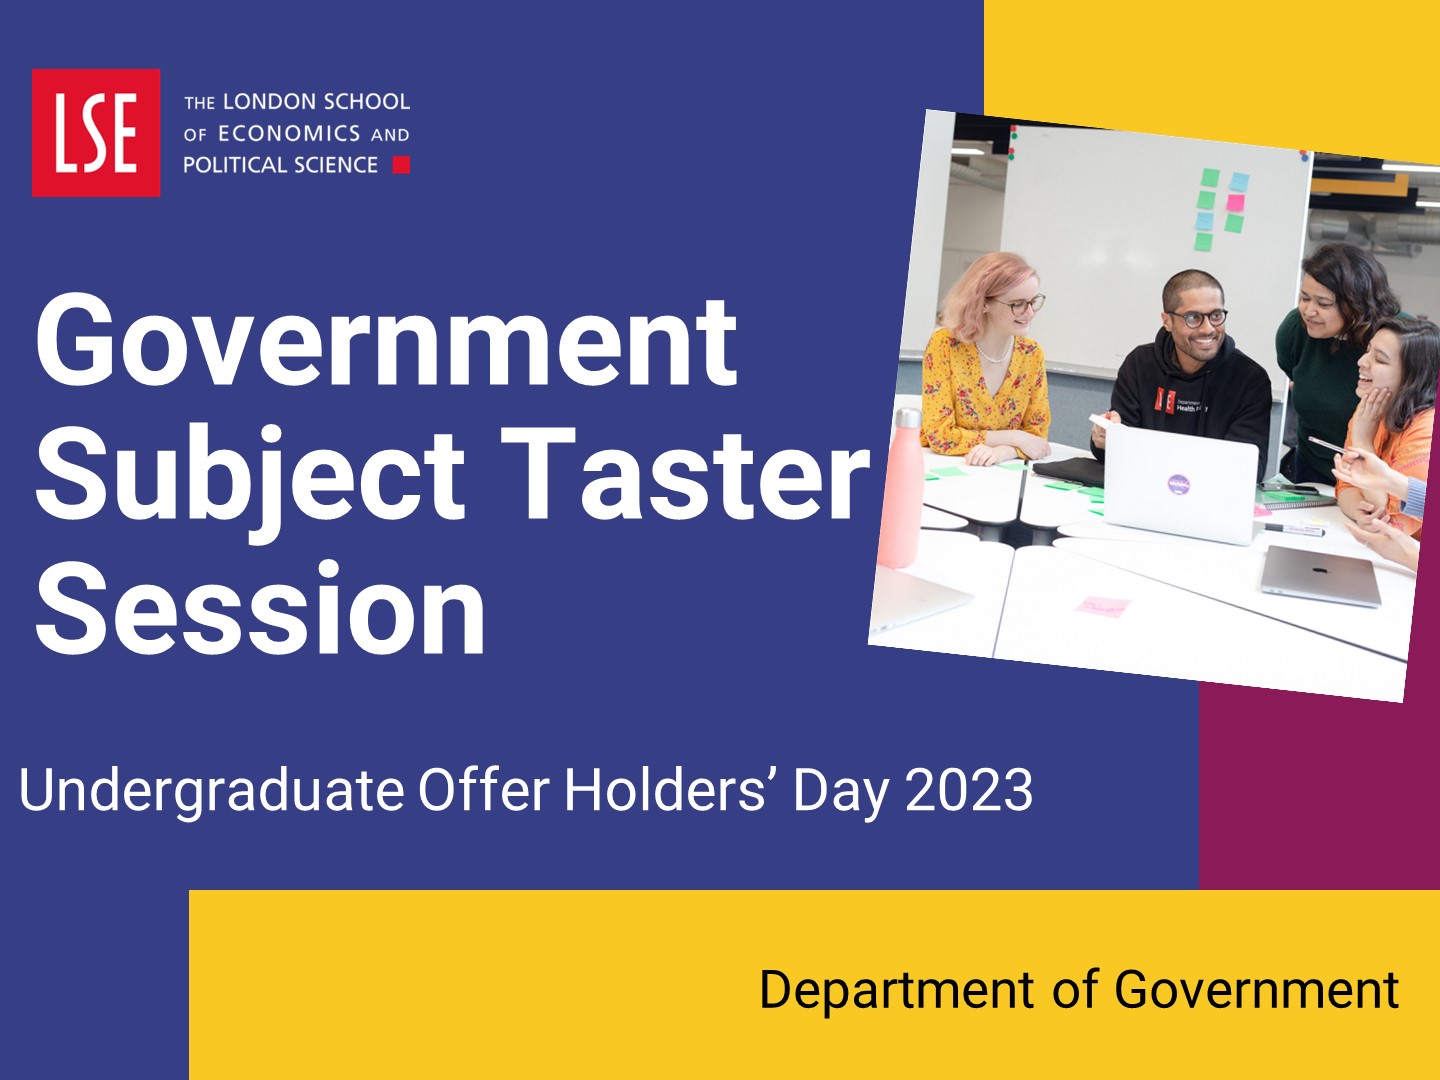 Watch the government subject taster session